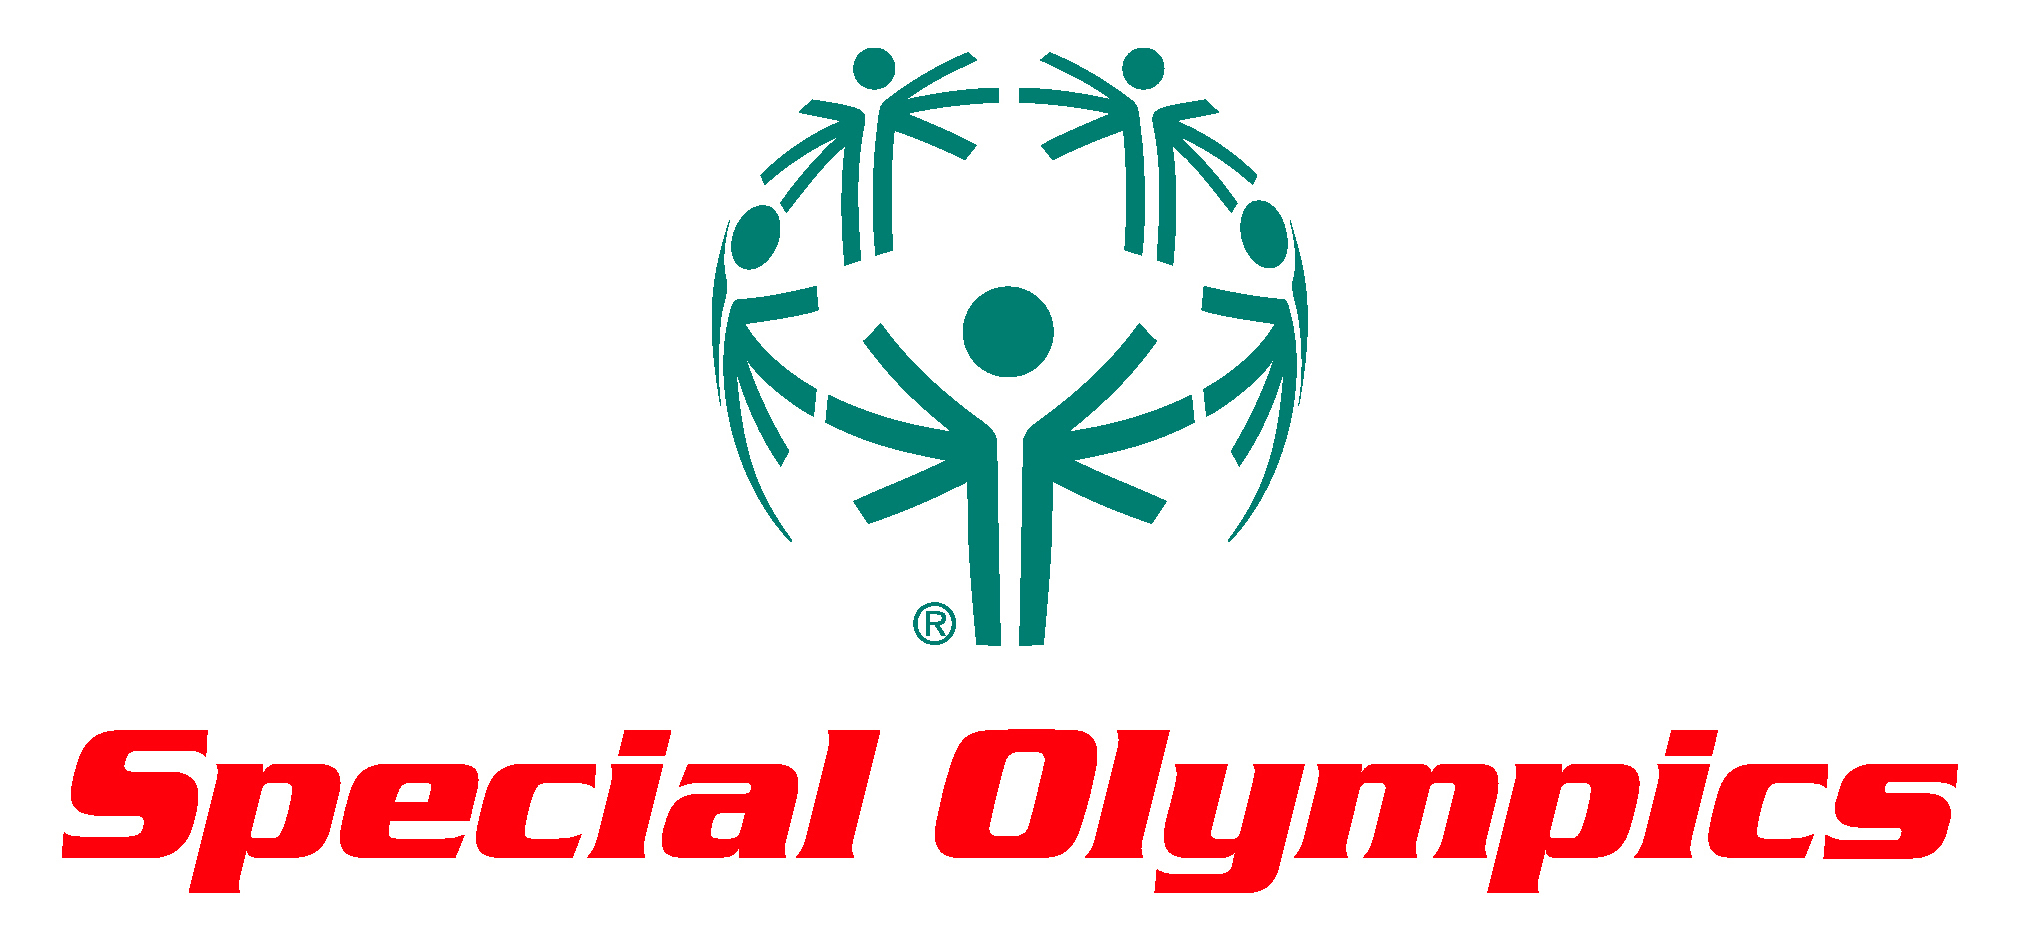 Image result for Special Olympics clipart